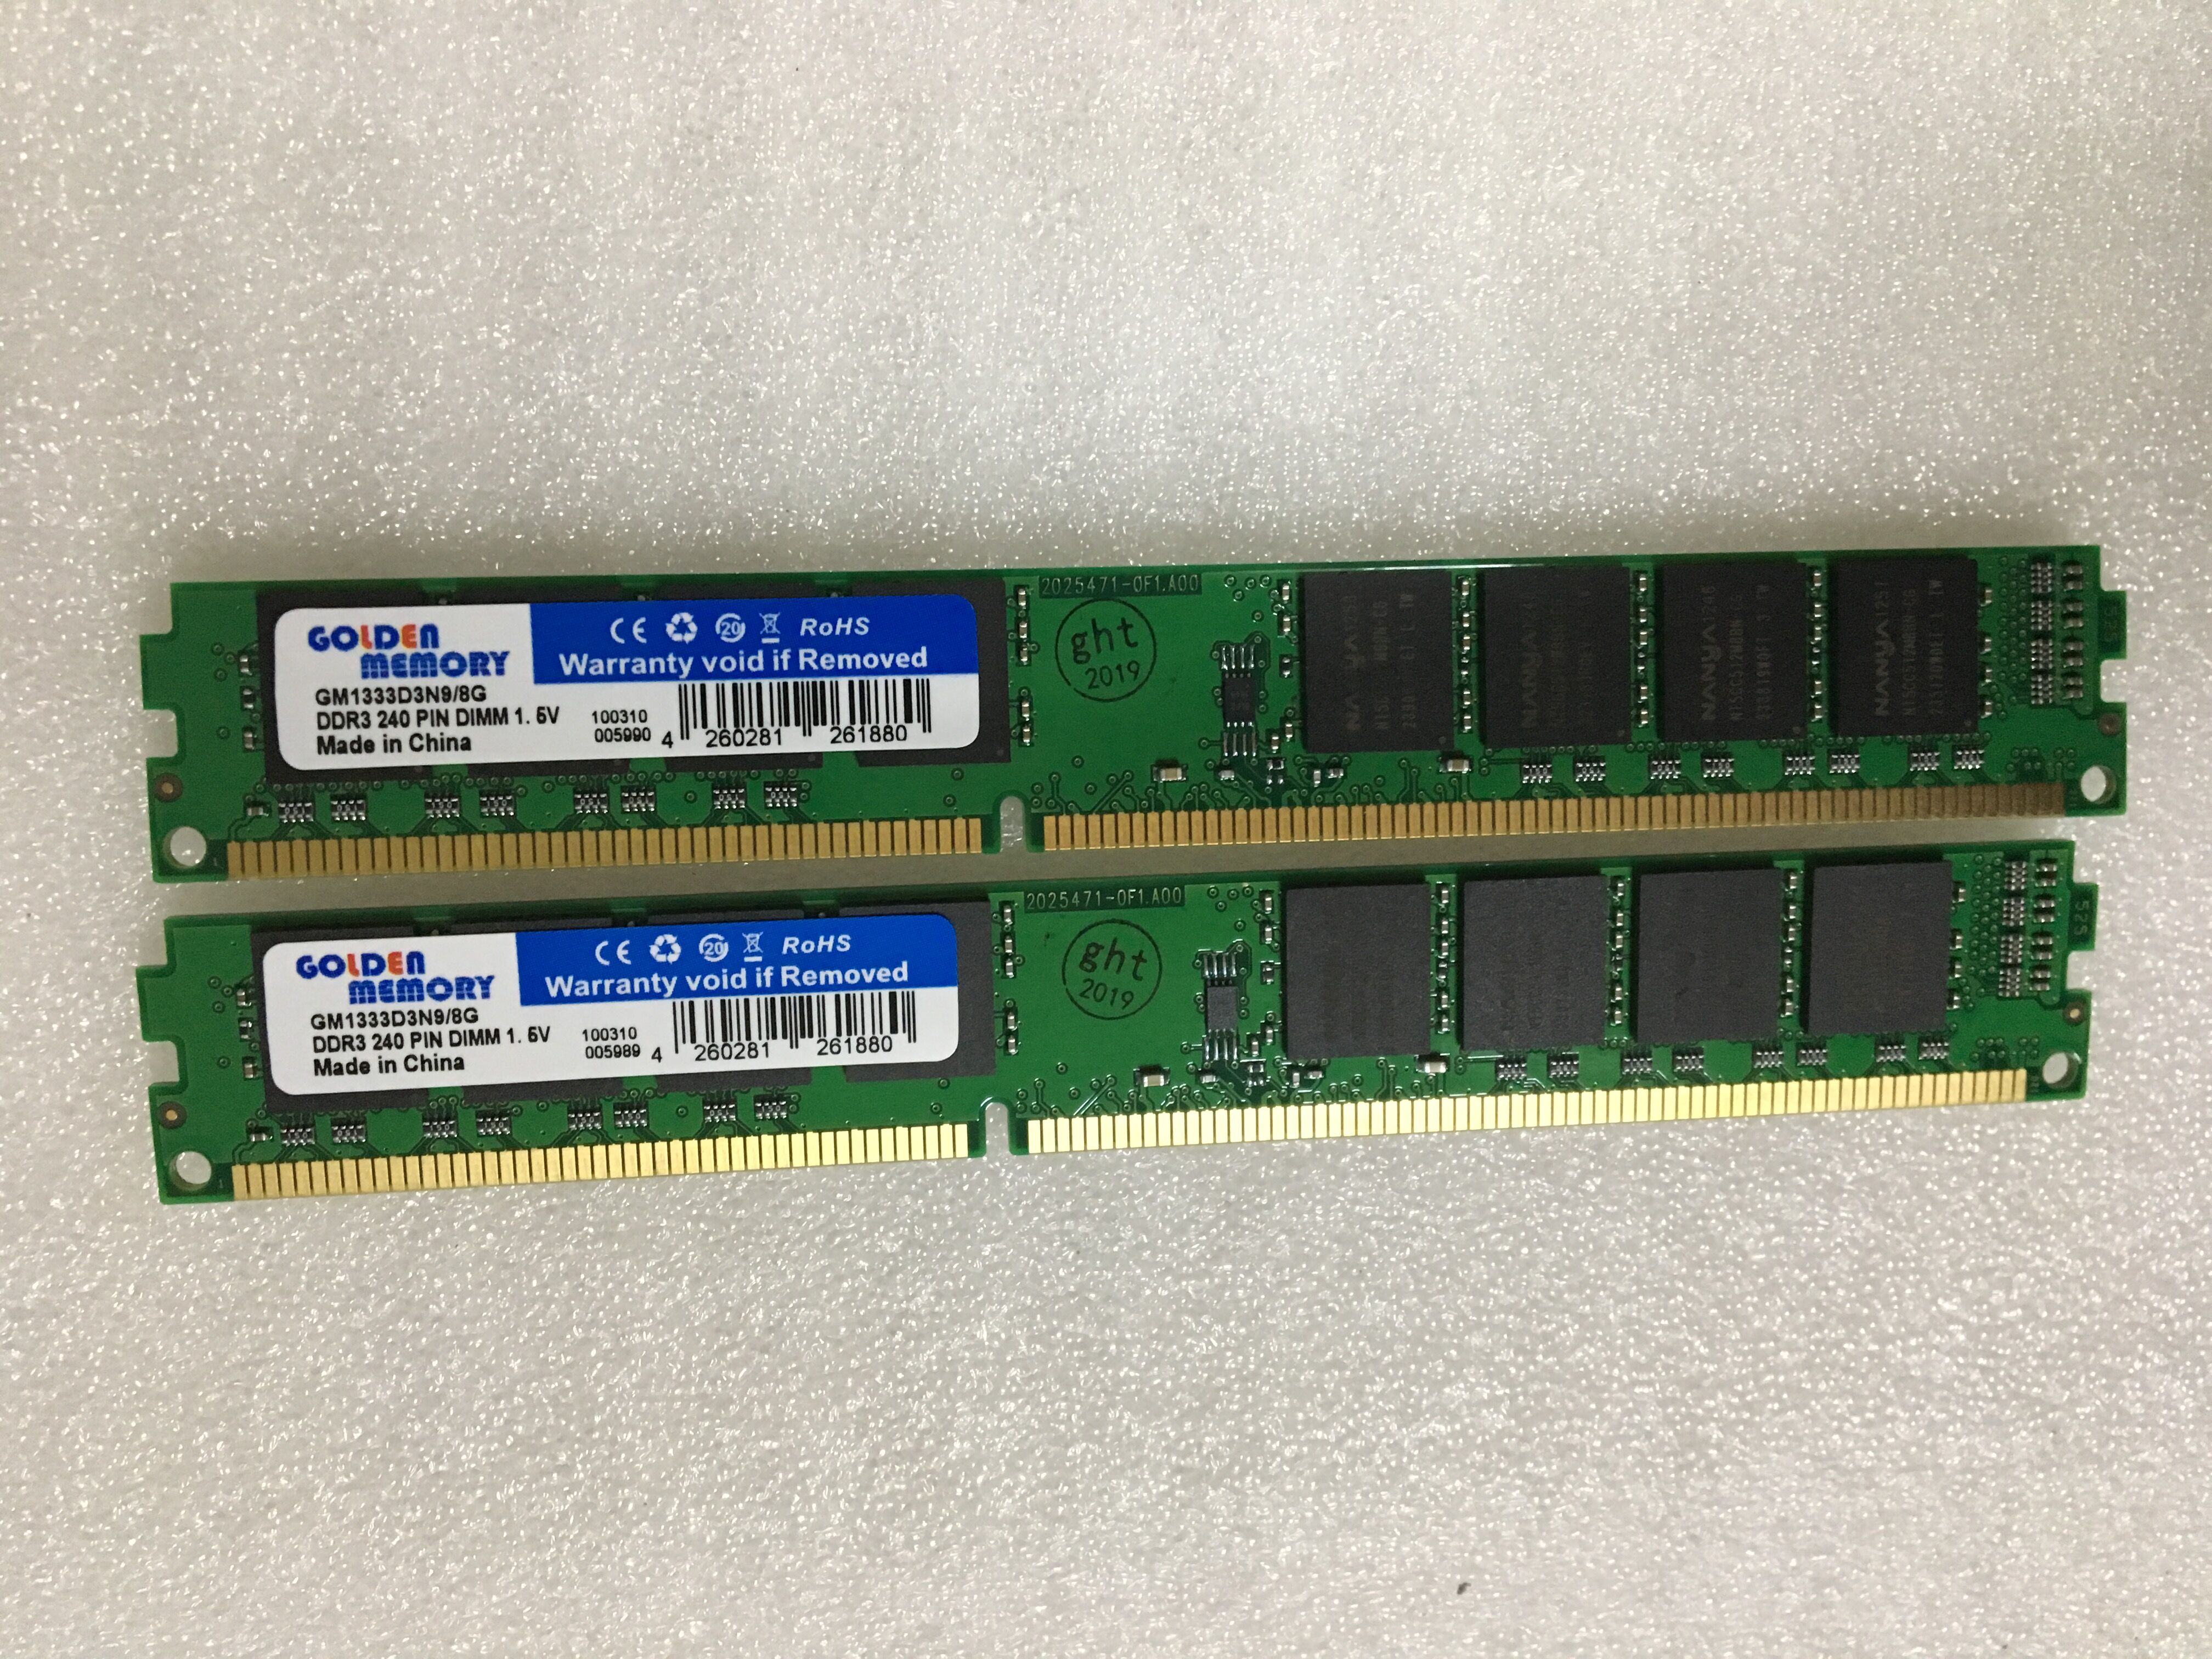 Retail packing and 1333mhz AMD 2GB ddr3 ram price in China